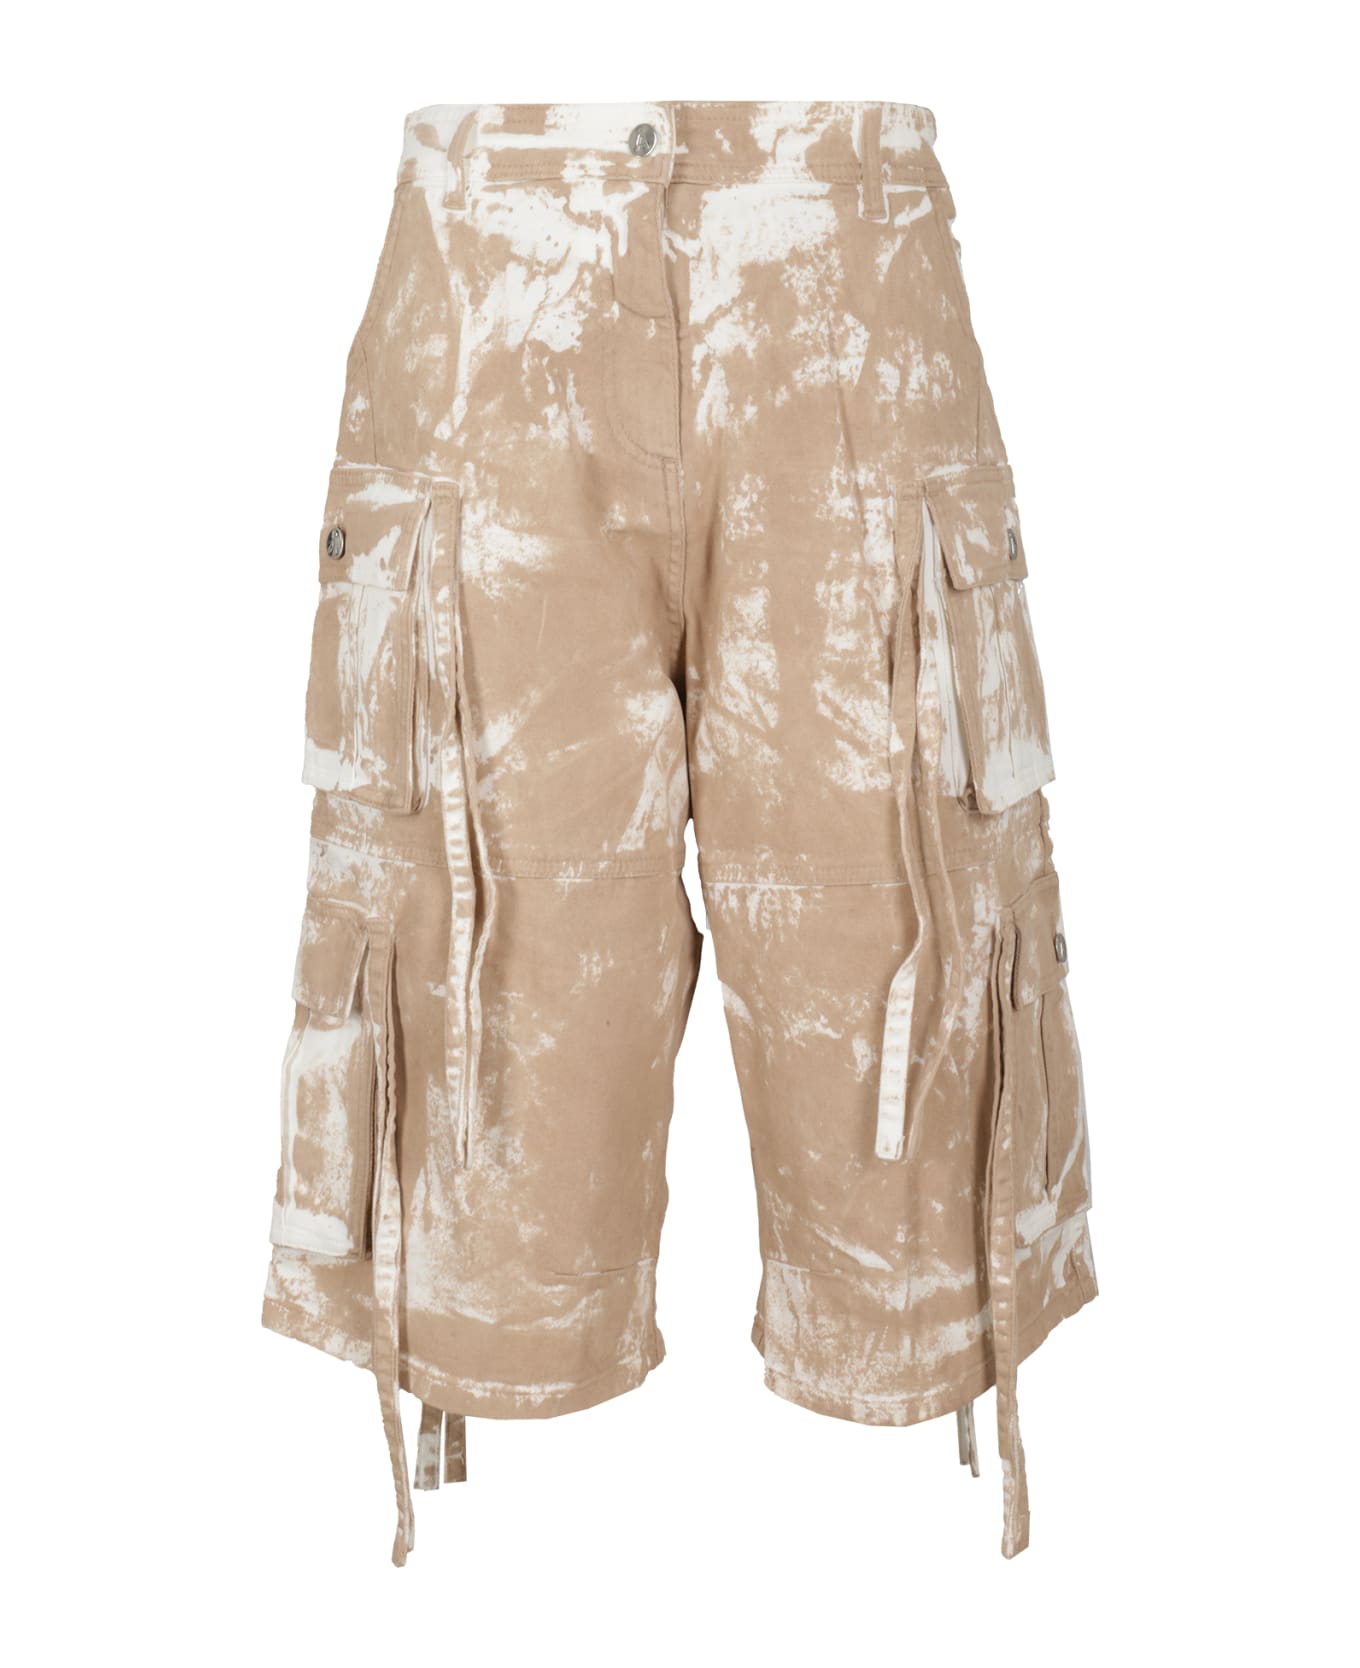 ANDREĀDAMO Washed Nude Drill Short - Washed Nude ボトムス